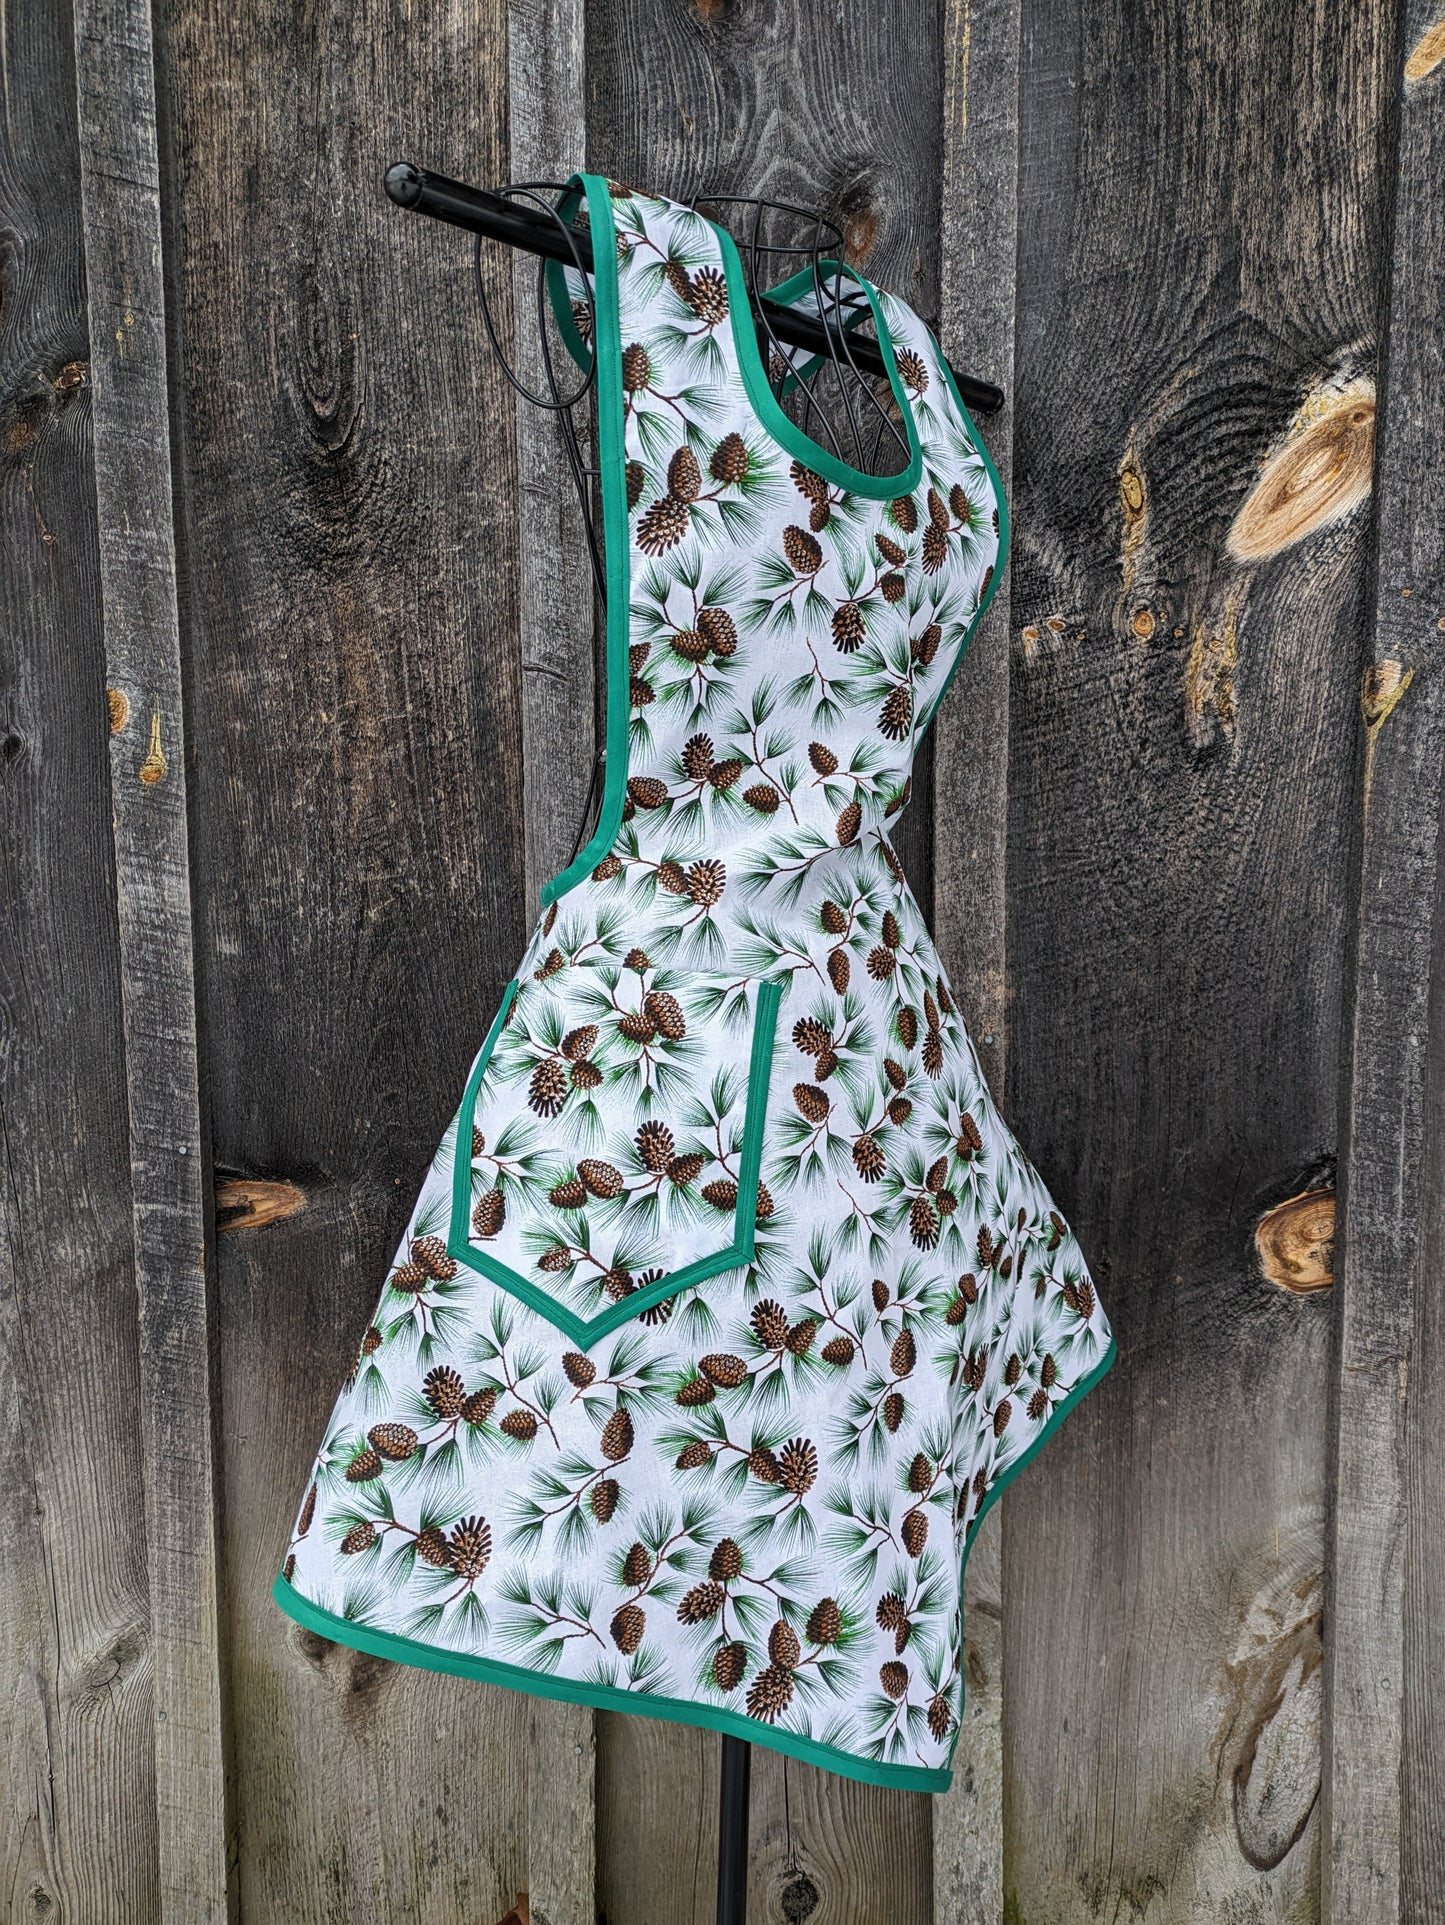 Glittering Snow on Pine Branches Vintage Inspired Apron